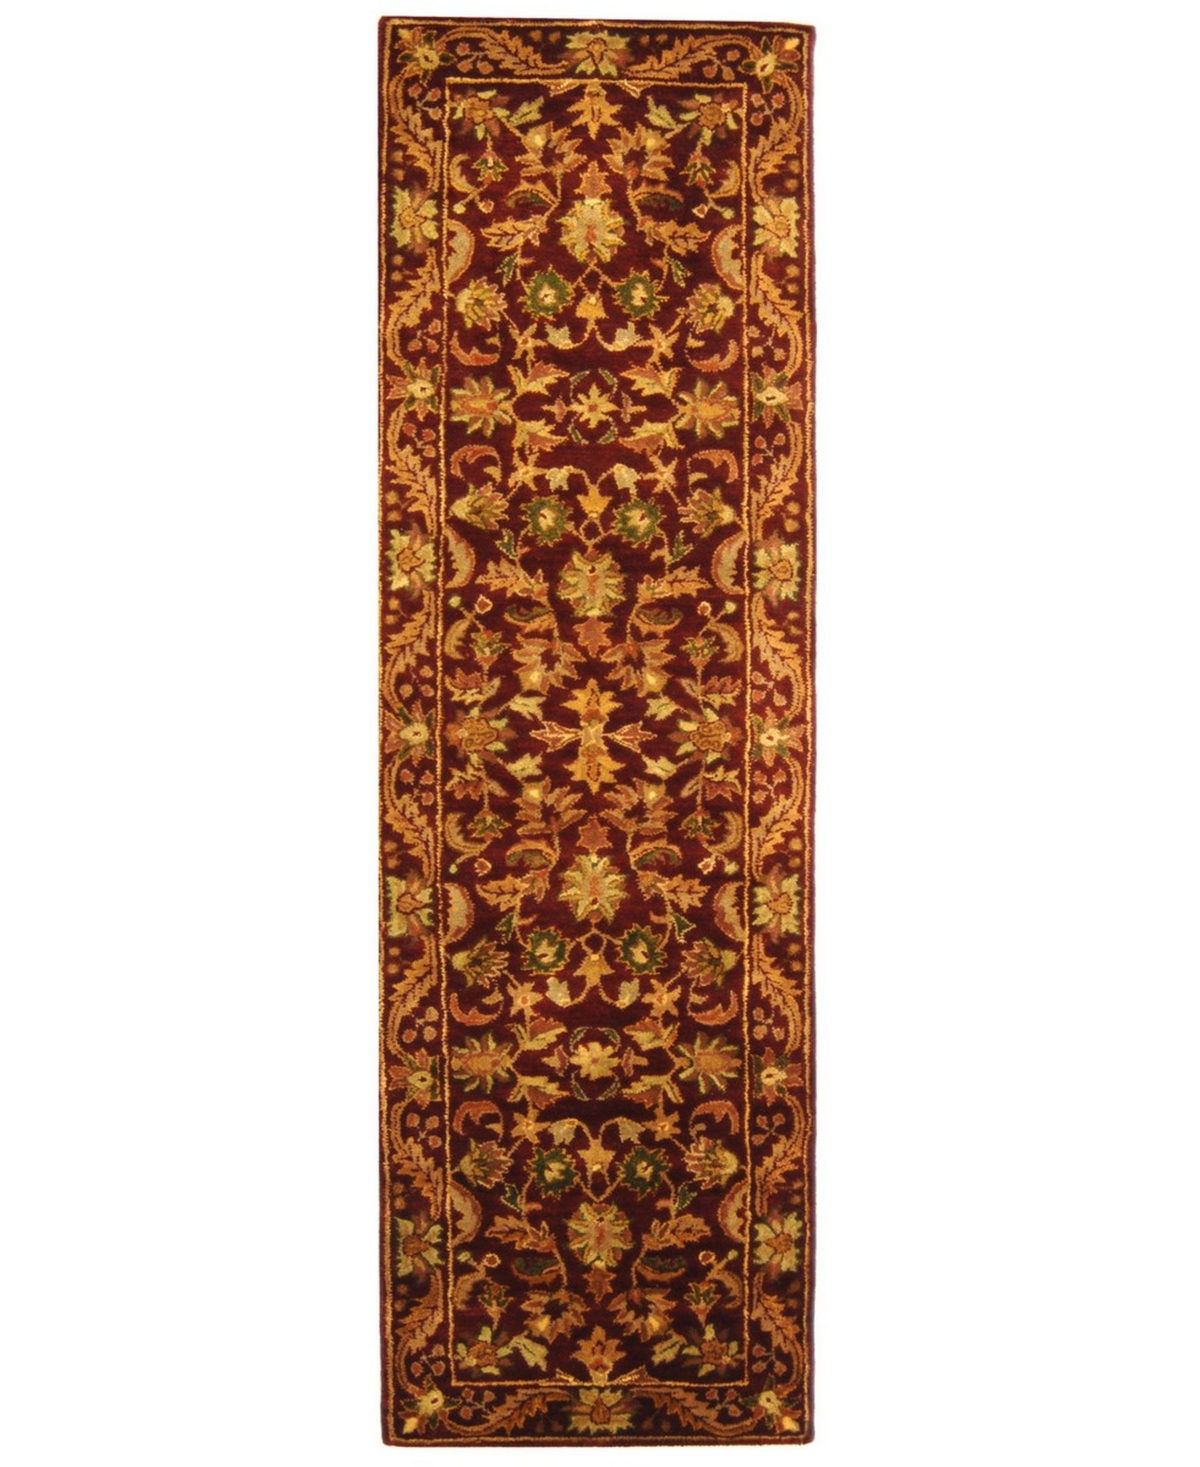 Safavieh Antiquity At52 Wine and Gold 2'3in x 20' Runner Area Rug - Wine